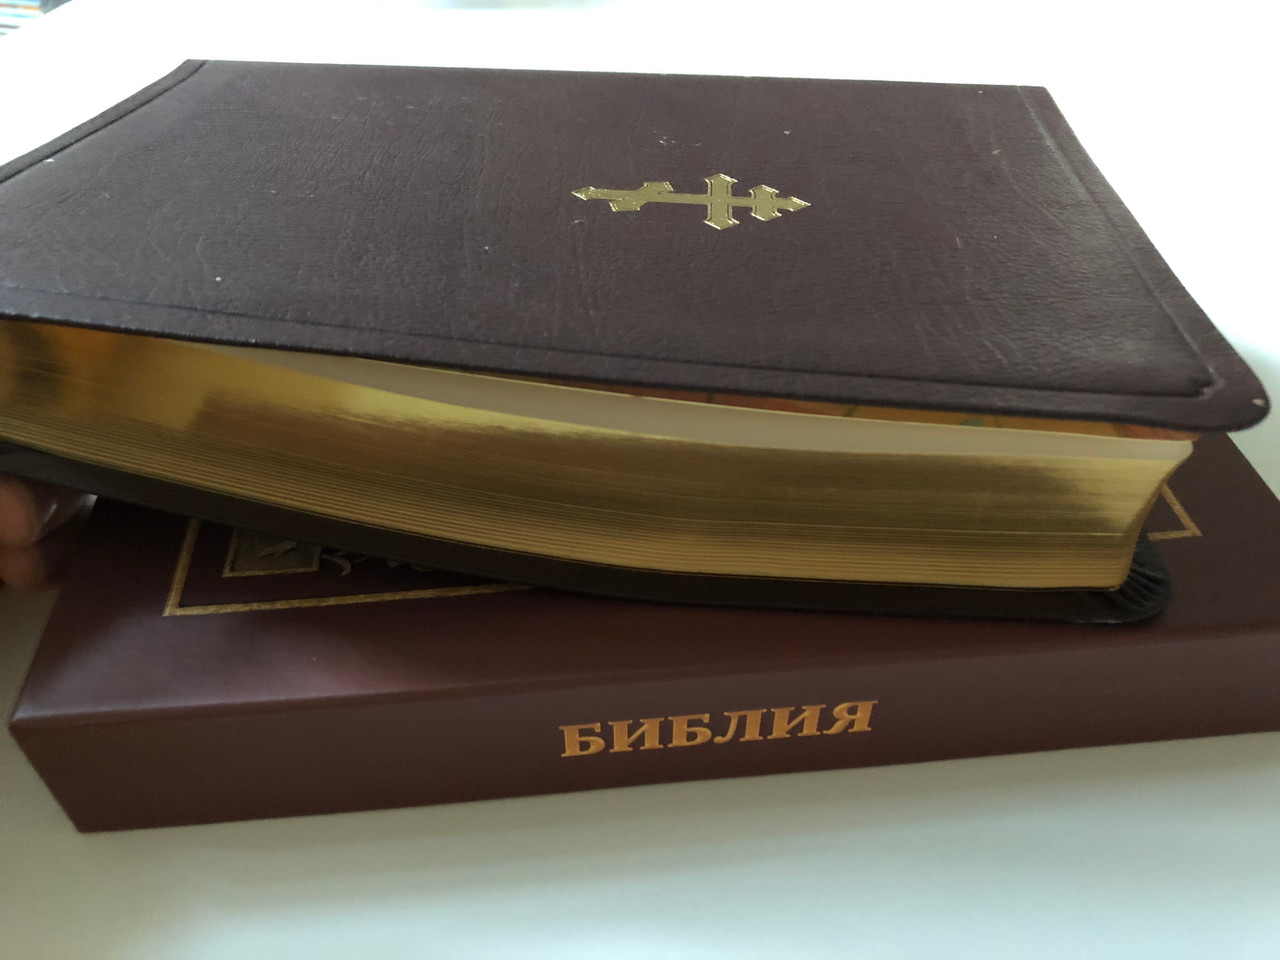 https://cdn10.bigcommerce.com/s-62bdpkt7pb/products/51182/images/260641/_-_Russian_Holy_Bible_19__09210.1670841817.1280.1280.JPG?c=2